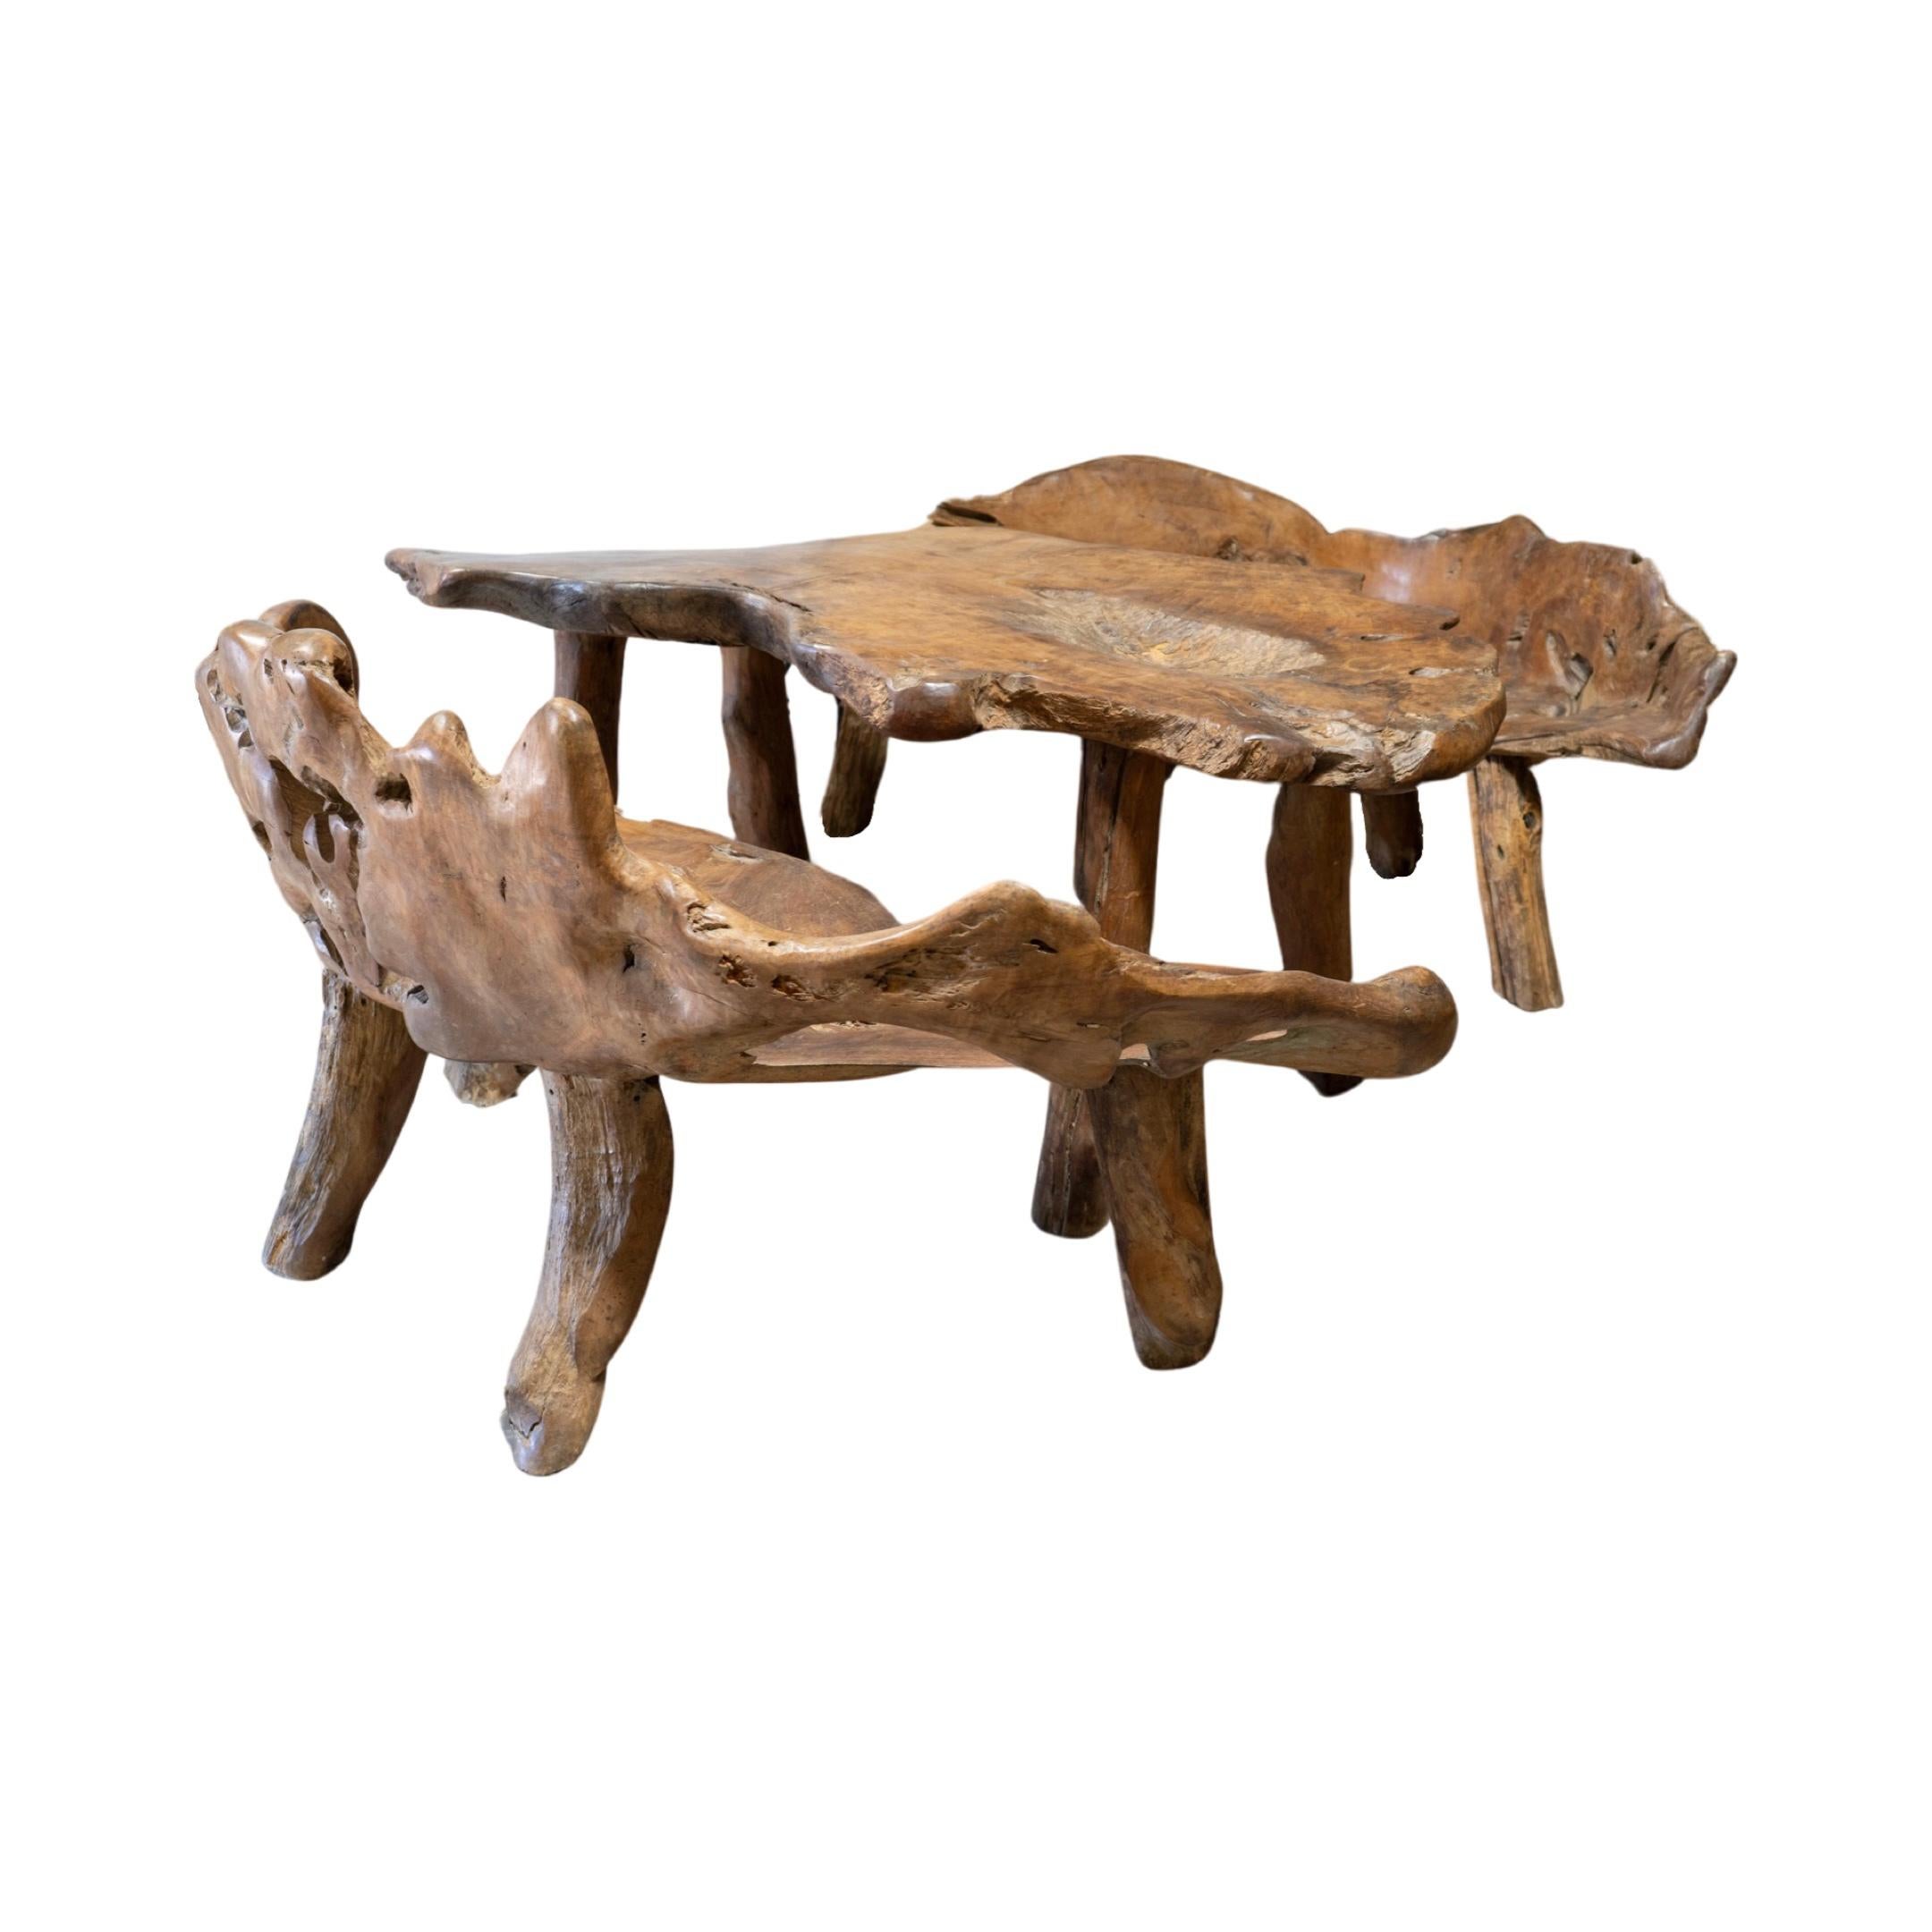 This unique garden table set is crafted from a 19th century French olive tree, providing a one-of-a-kind piece for any outdoor or indoor space. The set includes a table and two wide bench-style chairs, perfect for creating an earthy and inviting